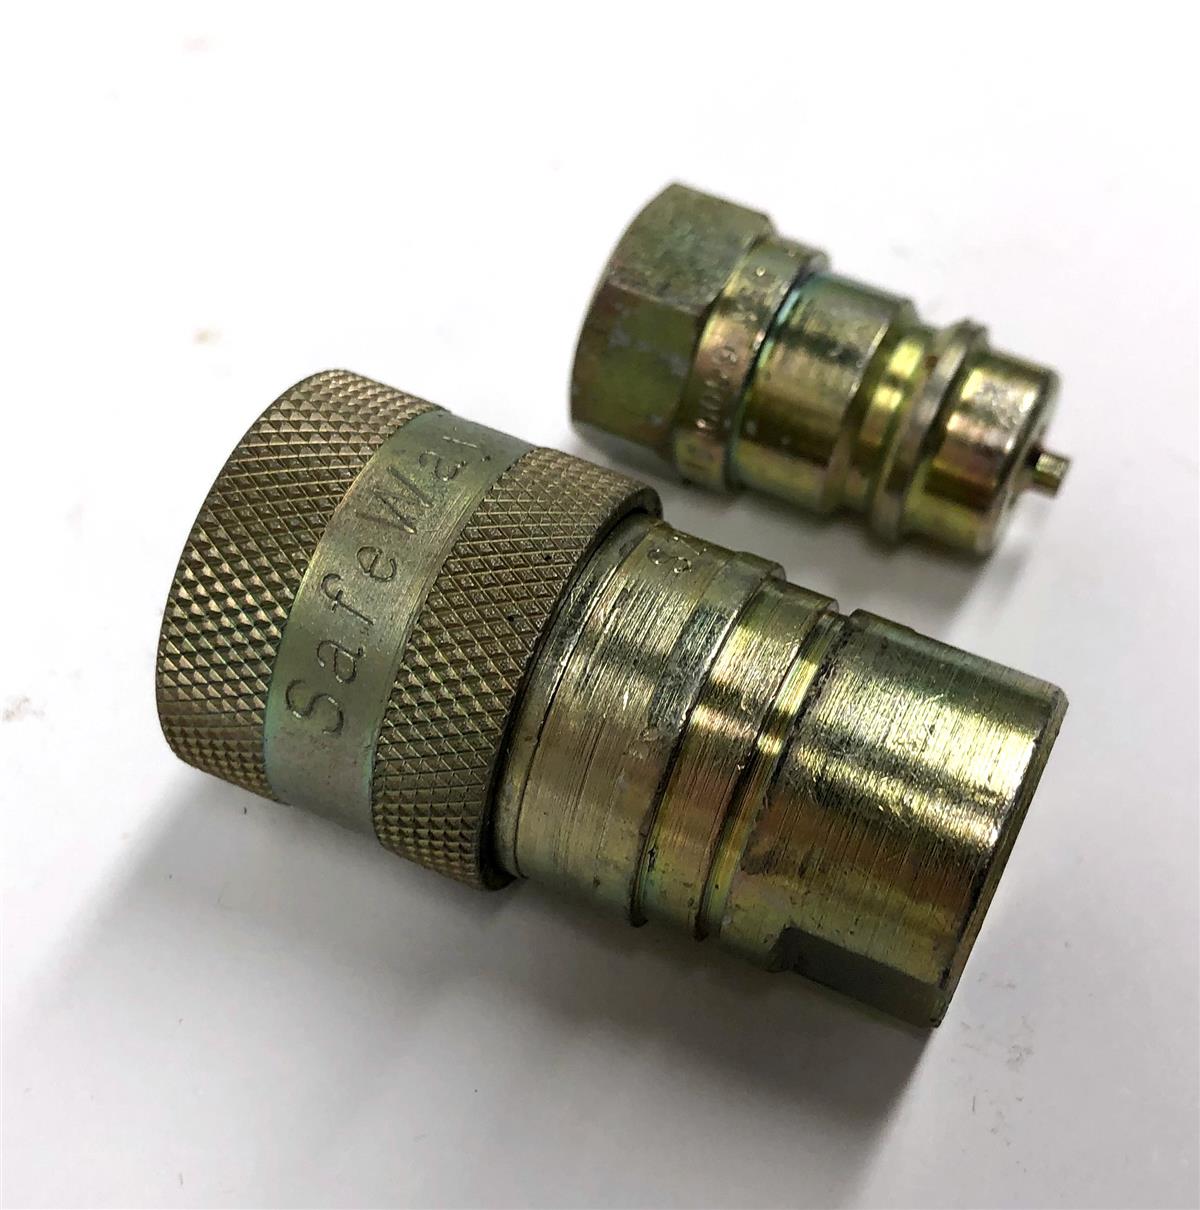 ALL-5332 | ALL-5332 Quick Disconnect Coupling Assembly (6).JPG